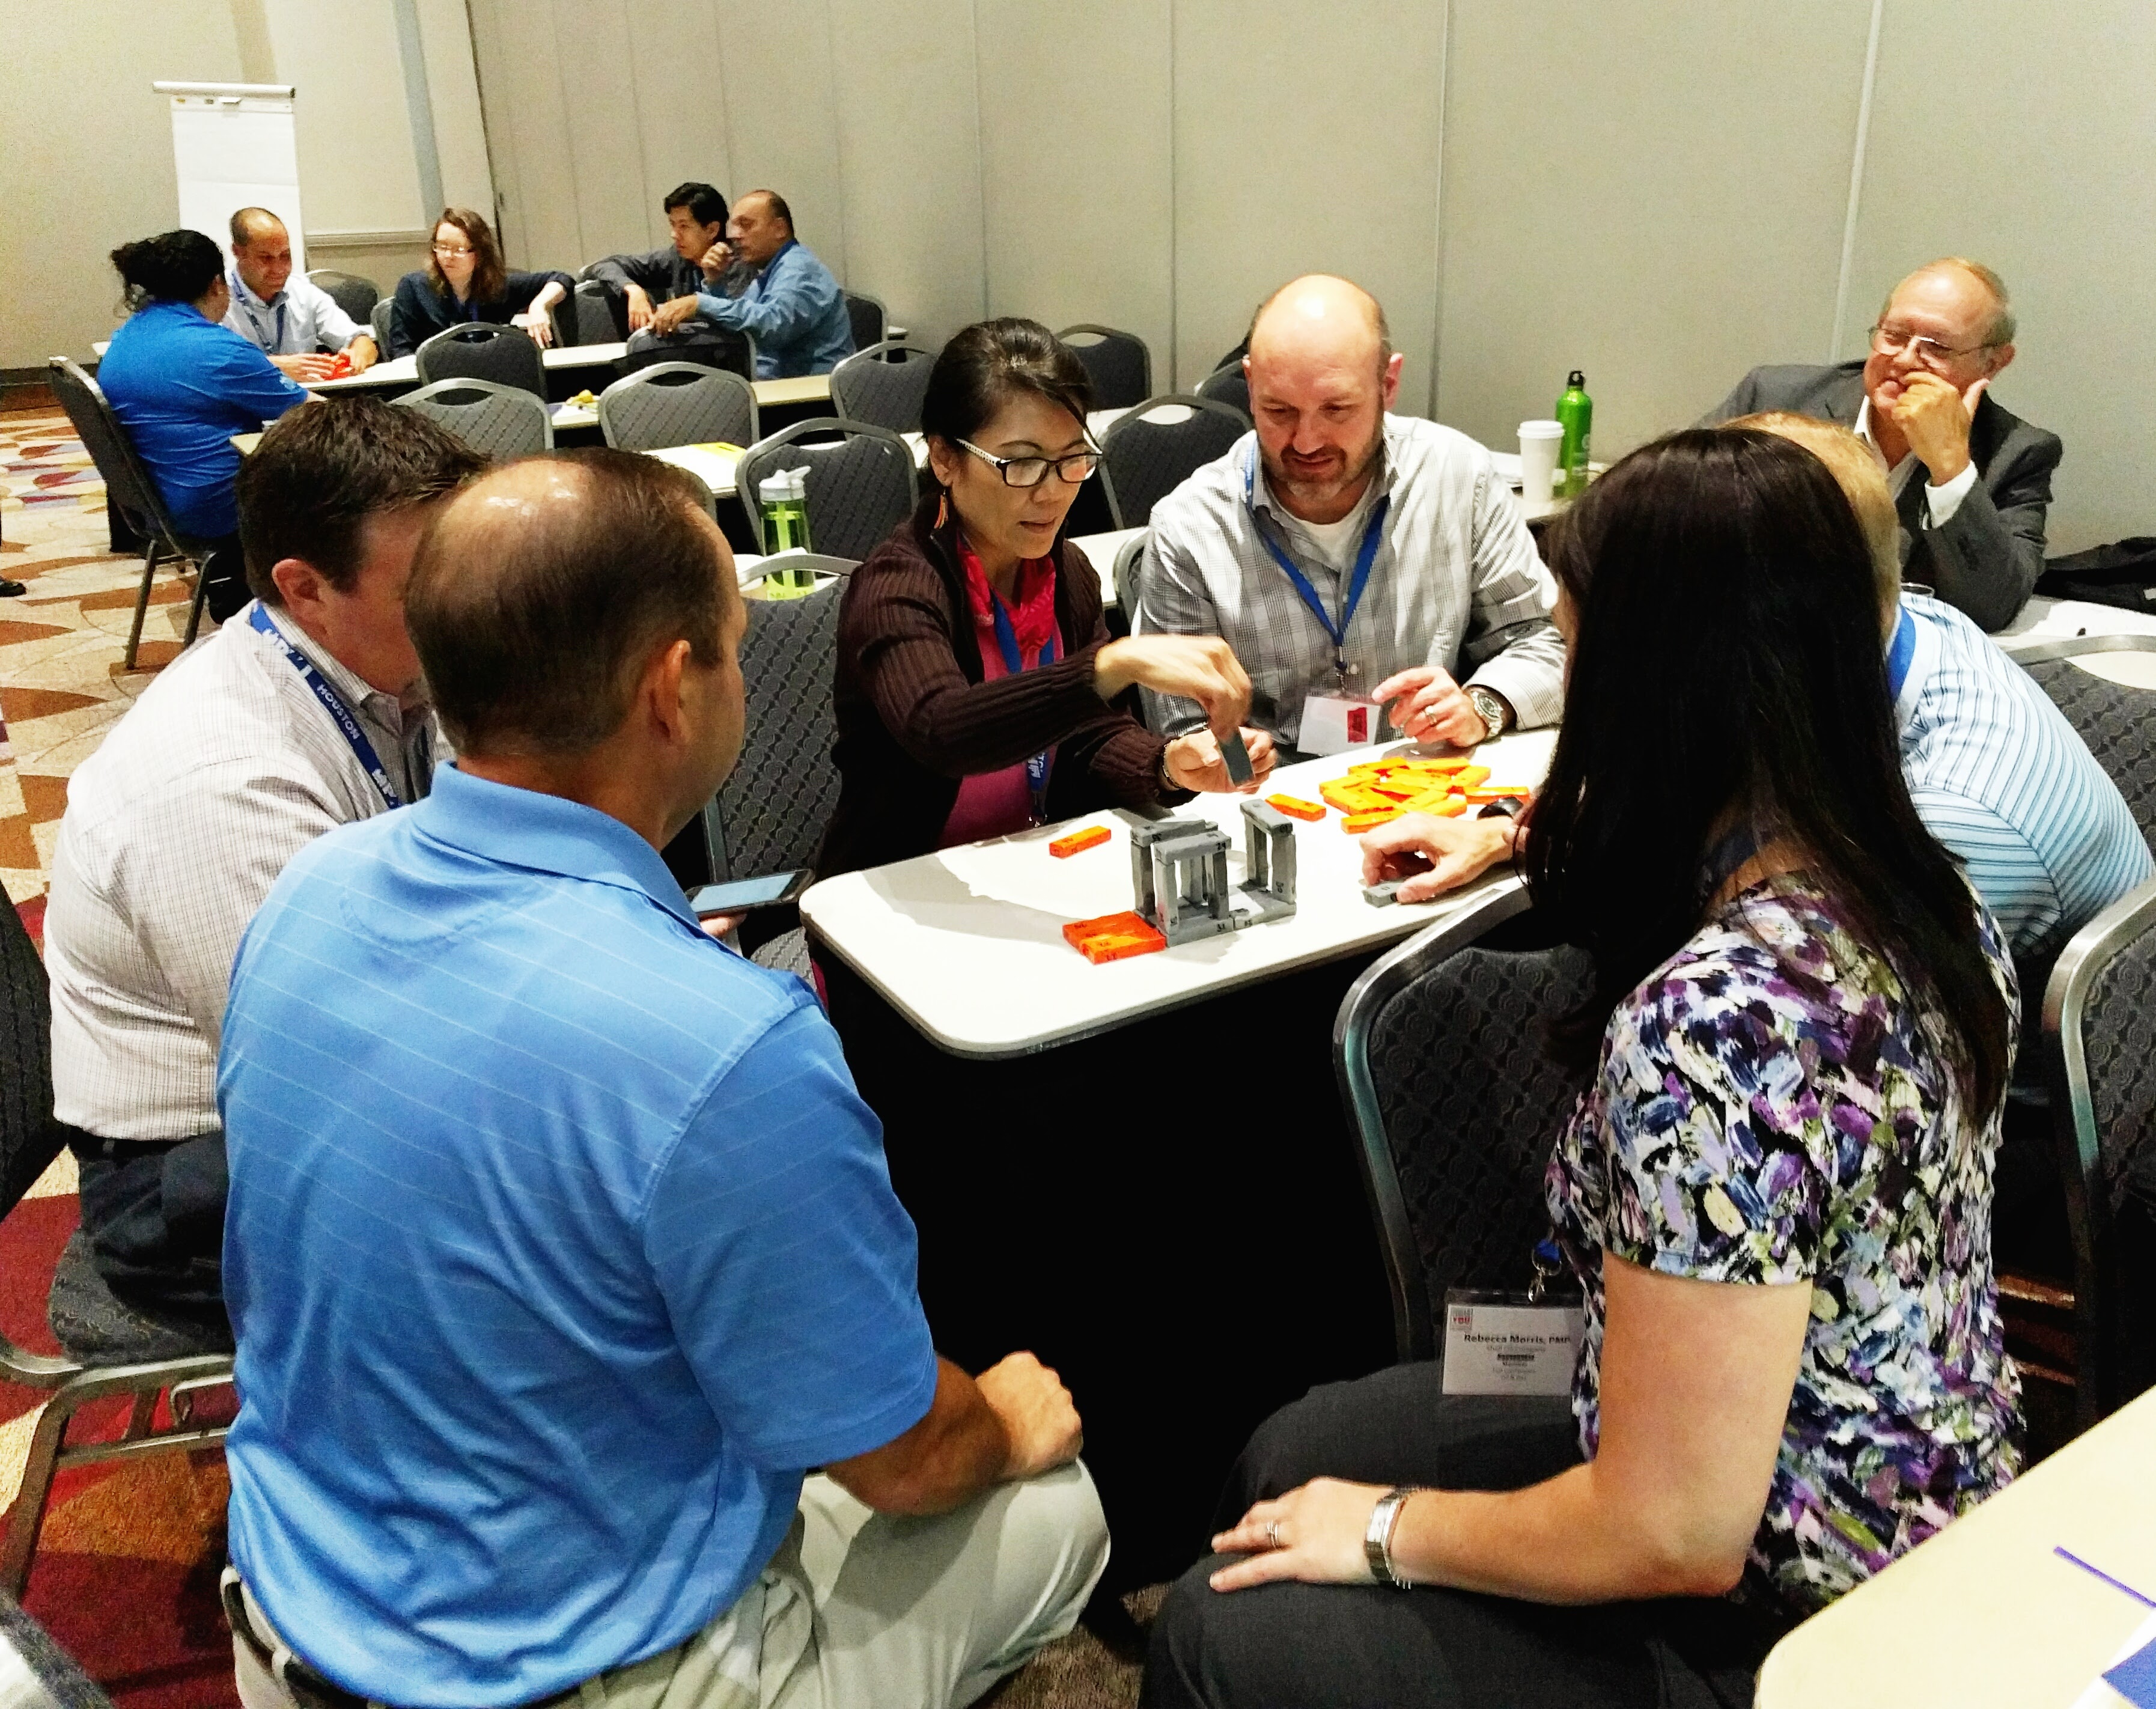 Attendees of my Hands On Agile Workshop at the PMI Houston Conference